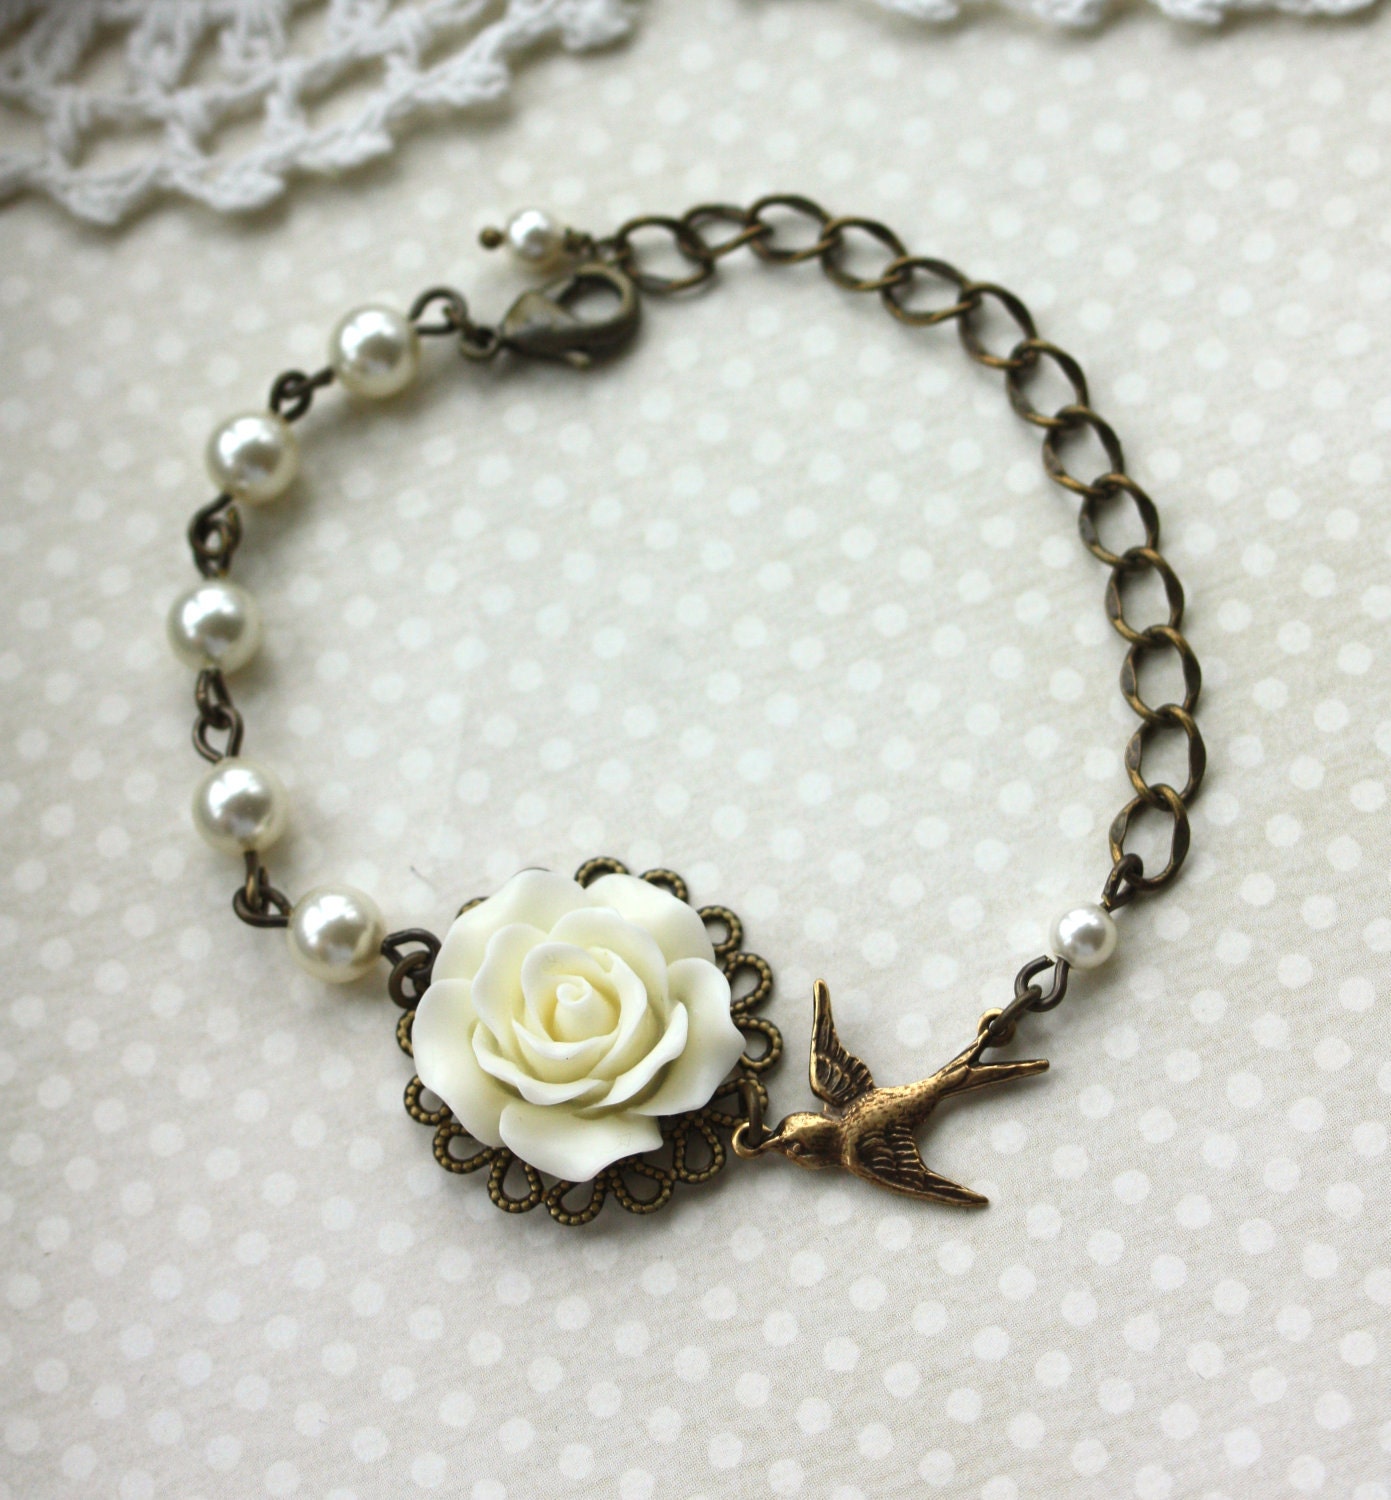 An Ivory Rose Flower, Swarovski Ivory Pearls, Swallow Bird Adjustable Bracelet. Bridesmaid Gifts. For Sister. Bridal Party Wedding Gifts